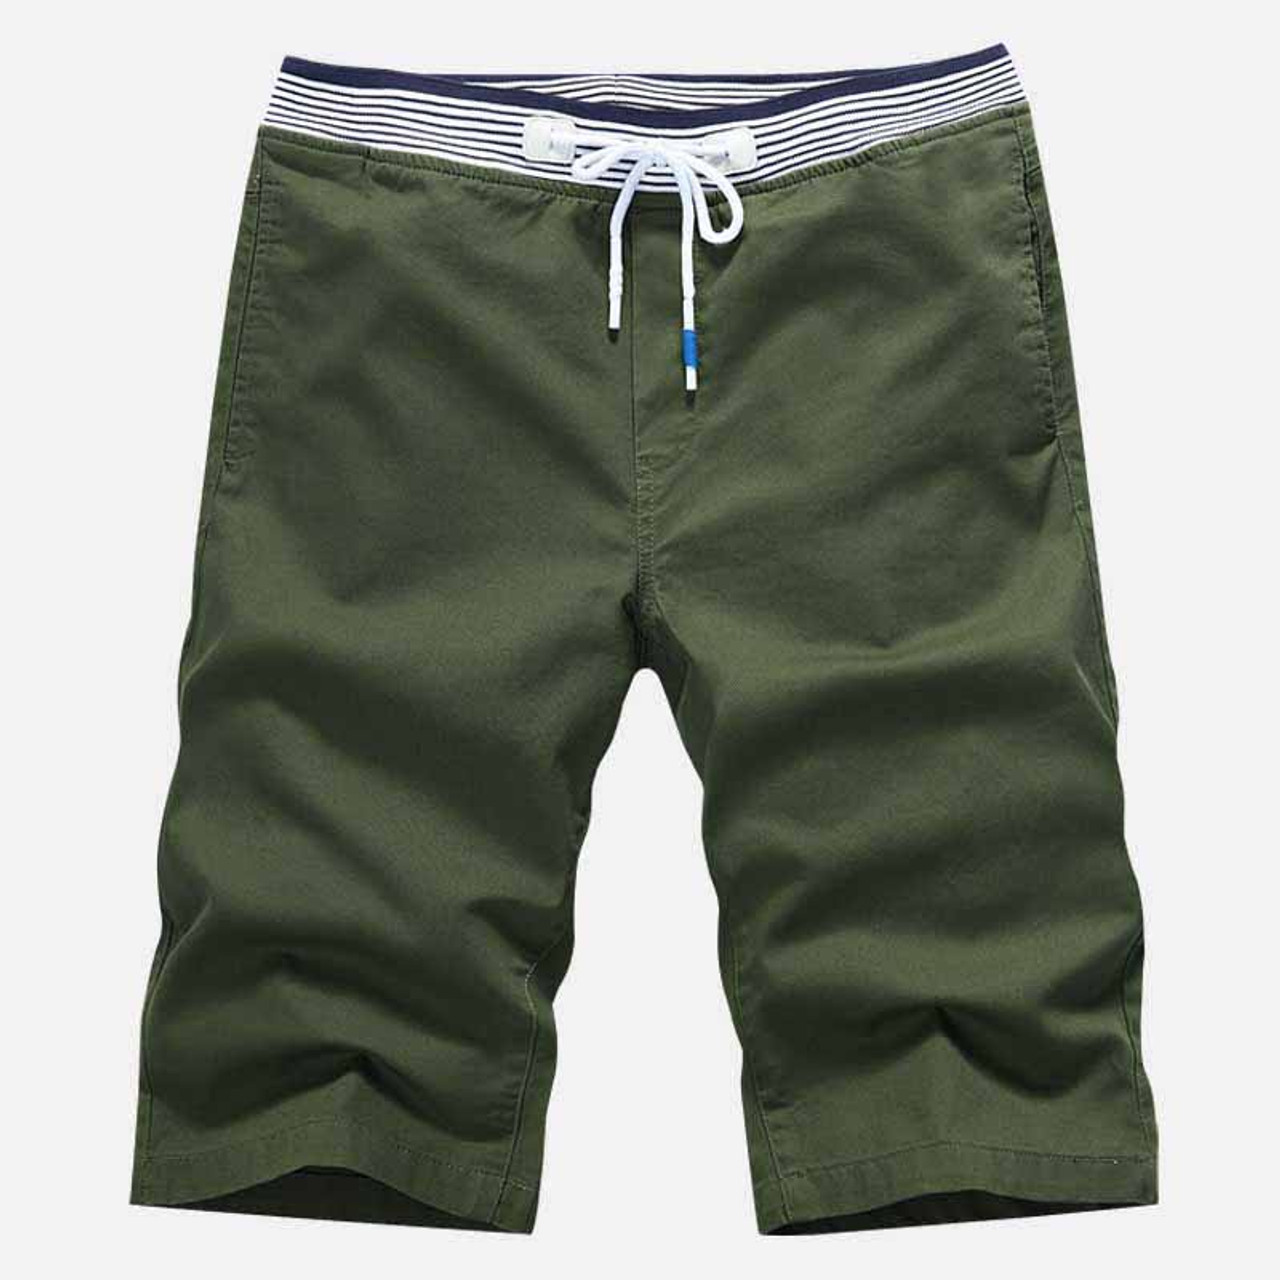 Army green short casual label print stretch waist | Mens shorts online ...